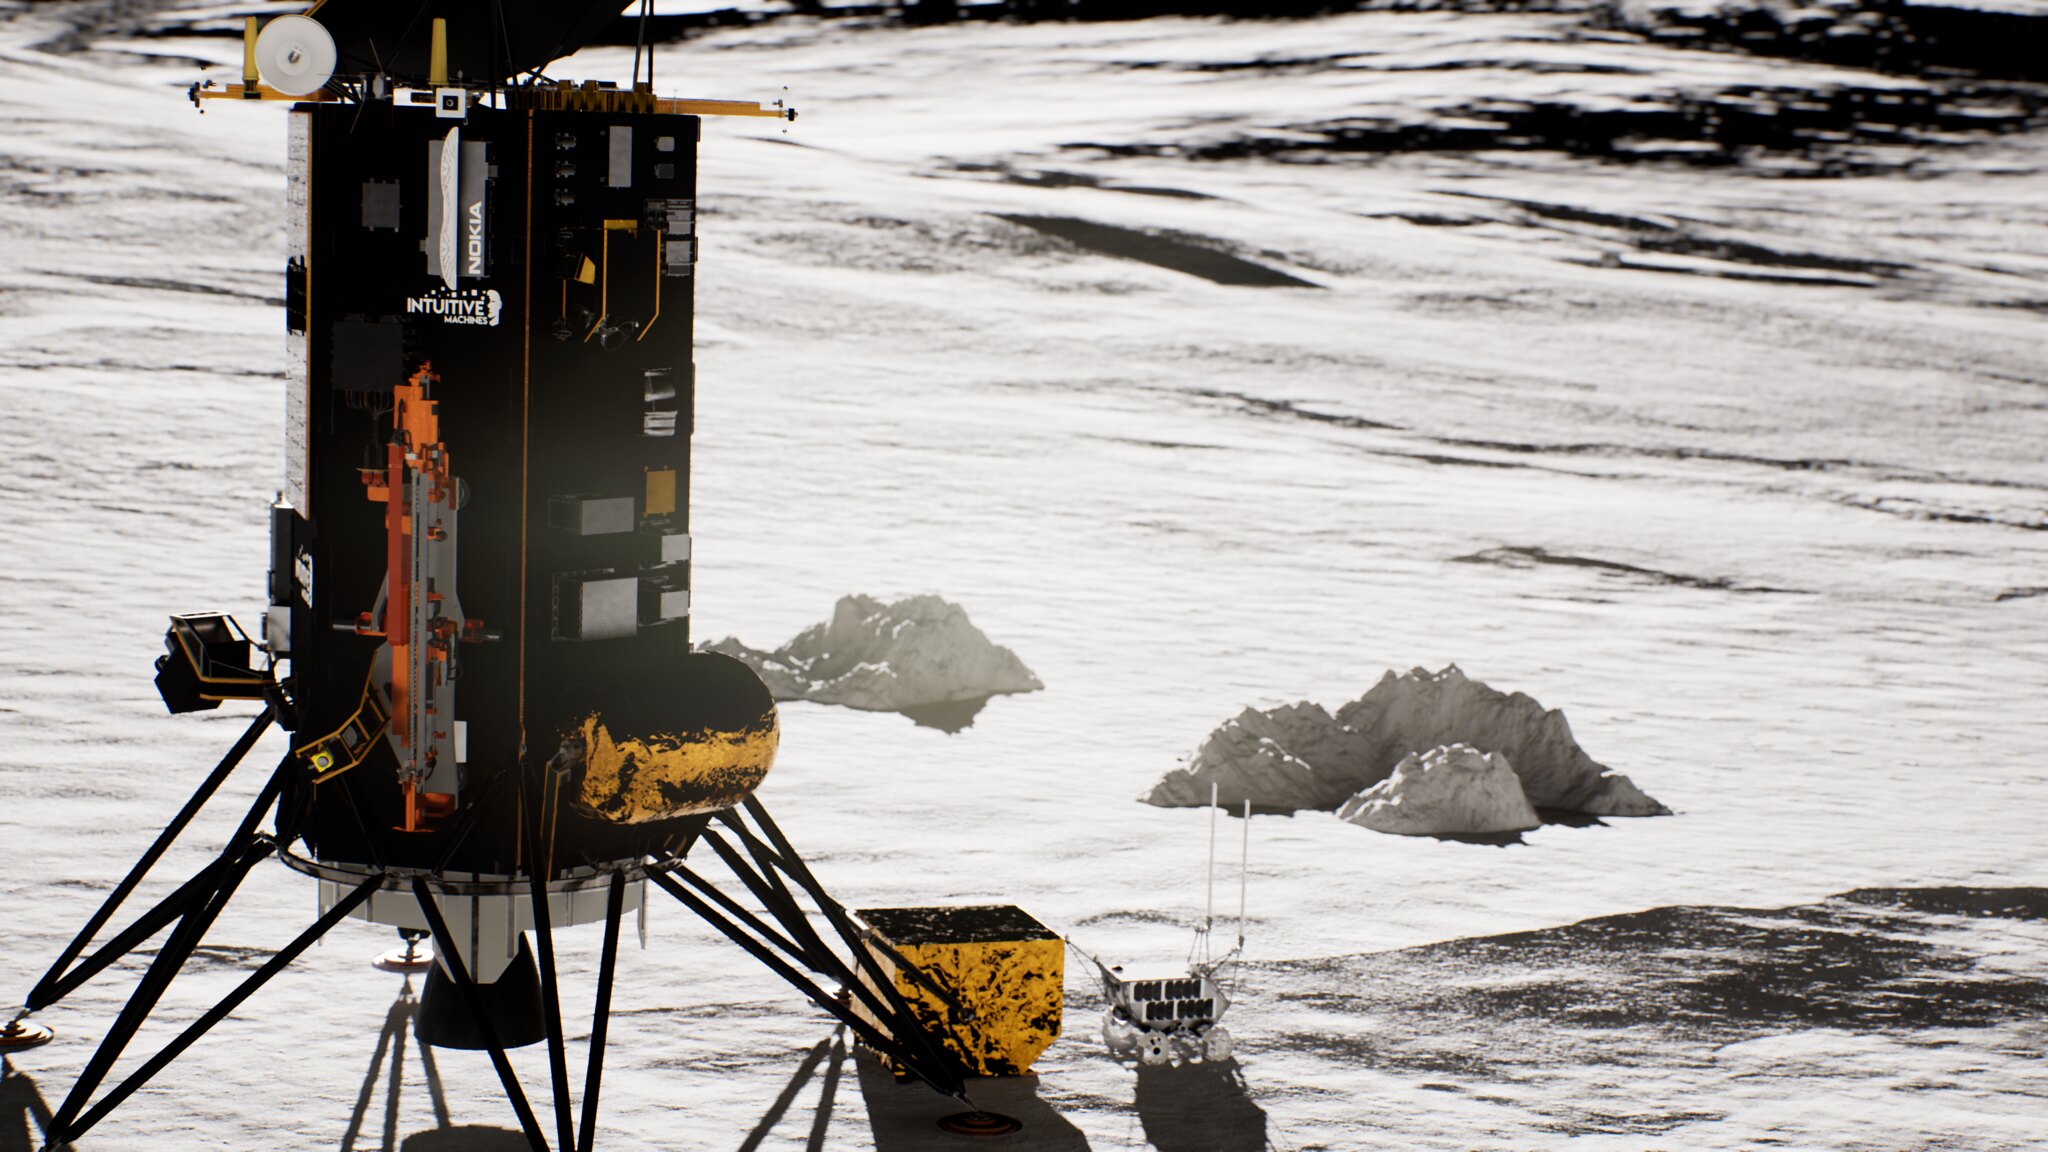 Rendering of the Lunar Lander by Intuitive Machines